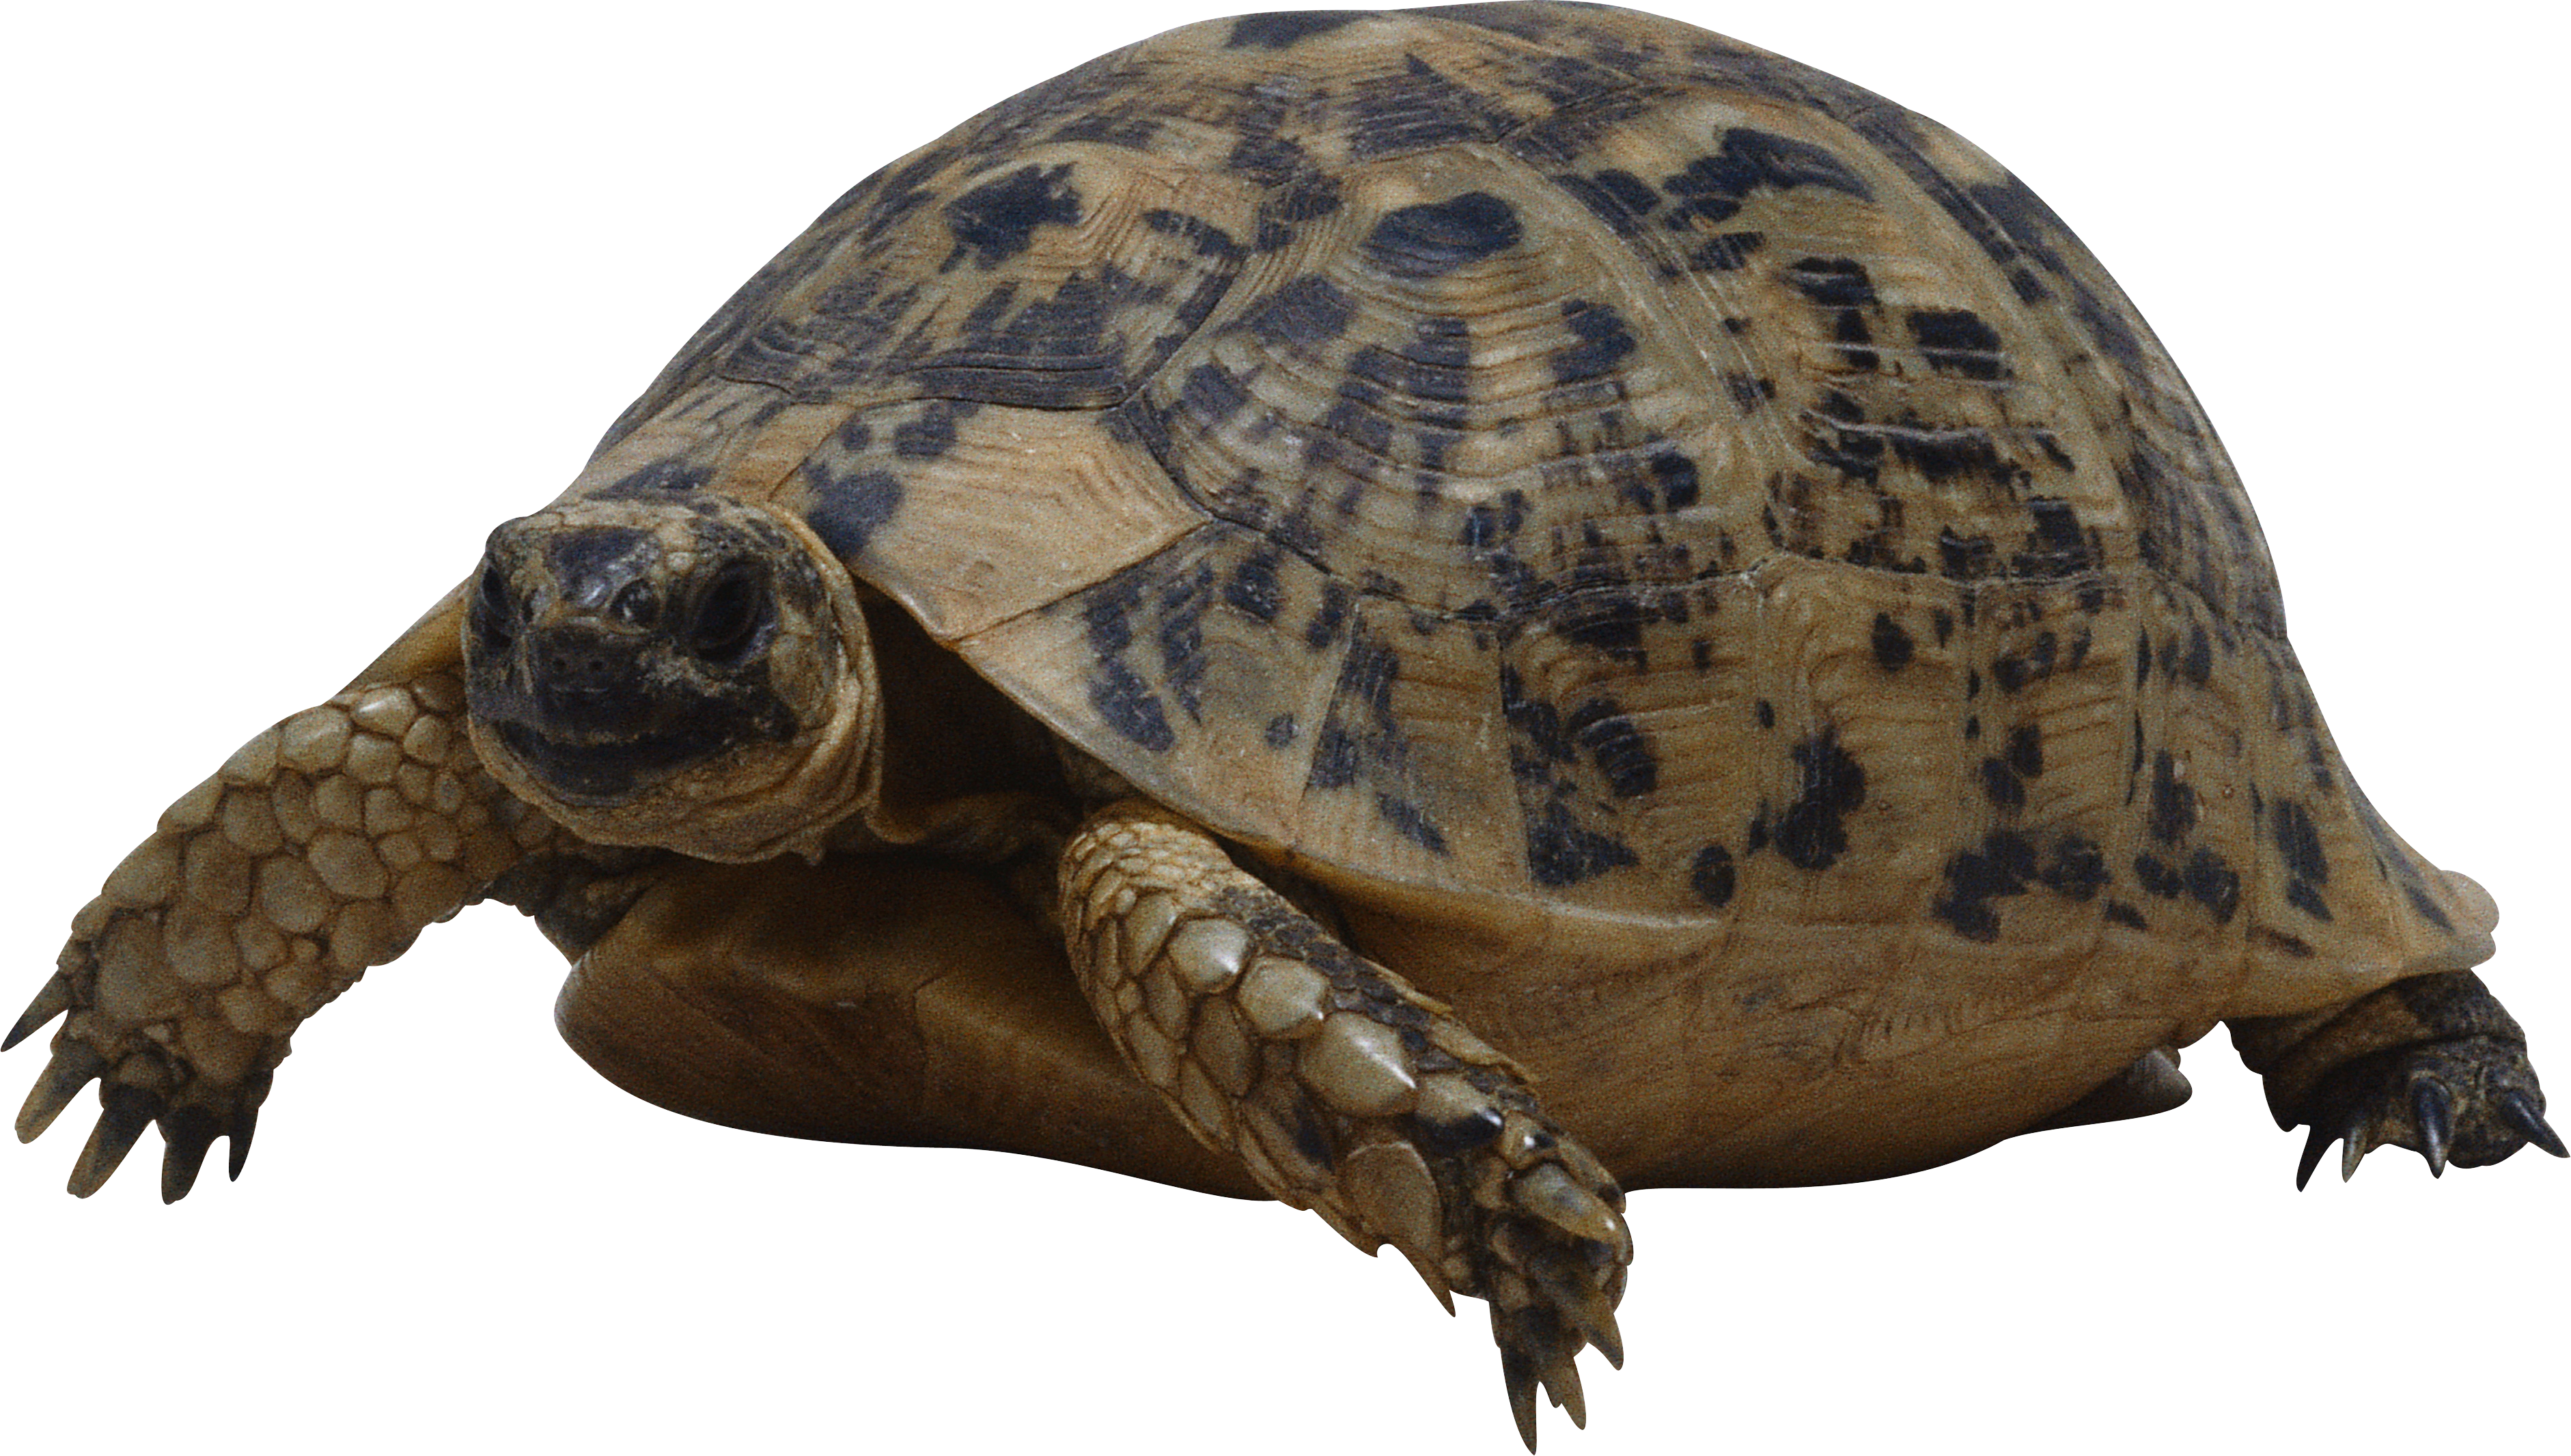 Moving Tortoise PNG HD Quality